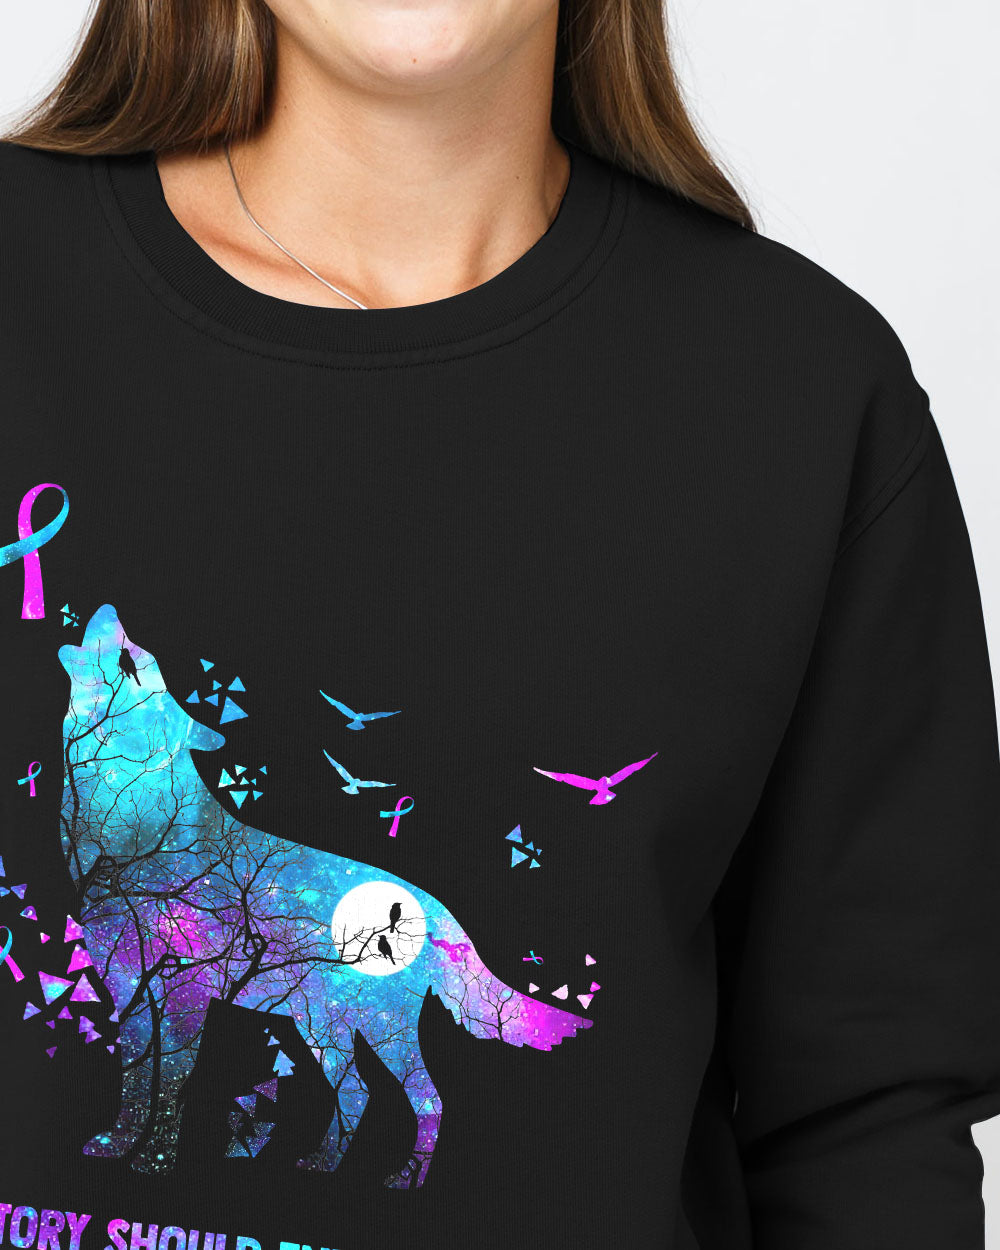 No Story Should End Too Soon Galaxy Wolf Women's Suicide Prevention Awareness Sweatshirt